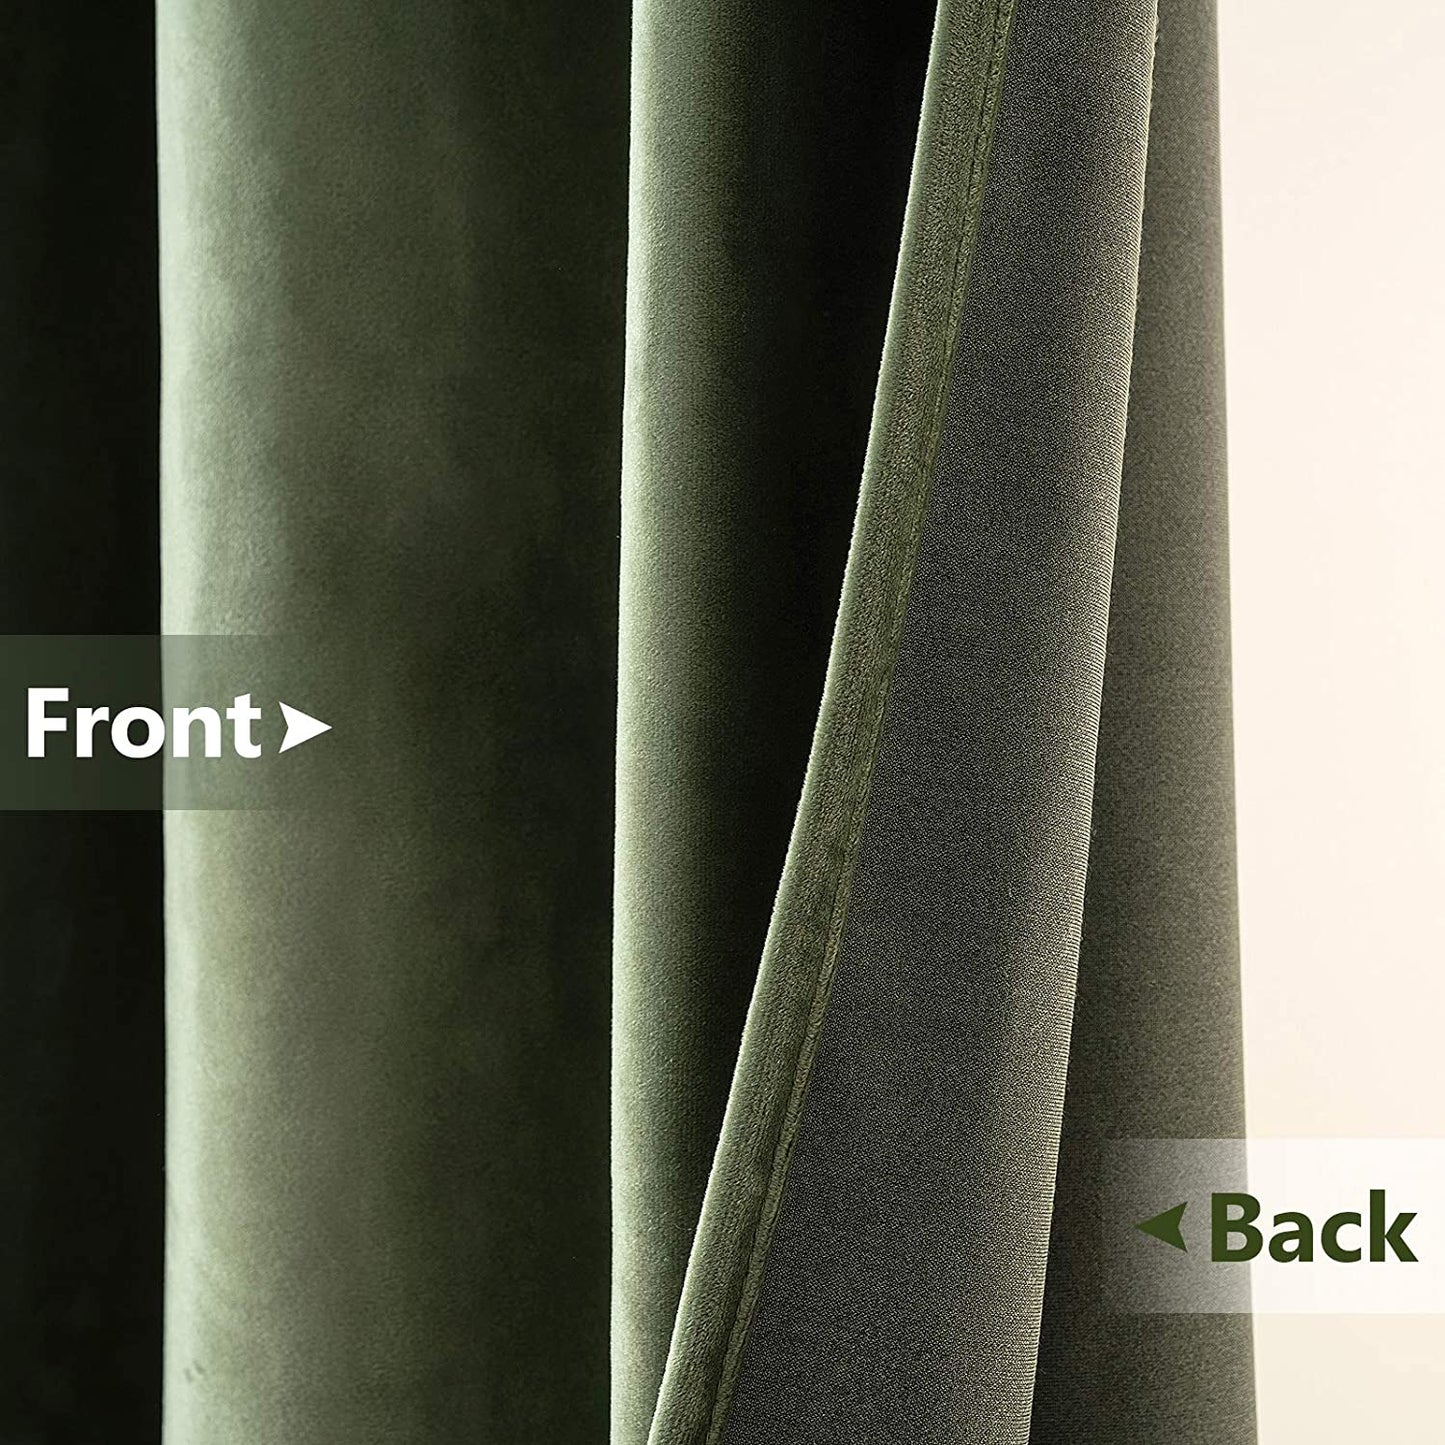 MIULEE Velvet Curtains Olive Green Elegant Grommet Curtains Thermal Insulated Soundproof Room Darkening Curtains/Drapes for Classical Living Room Bedroom Decor 52 X 84 Inch Set of 2  MIULEE   